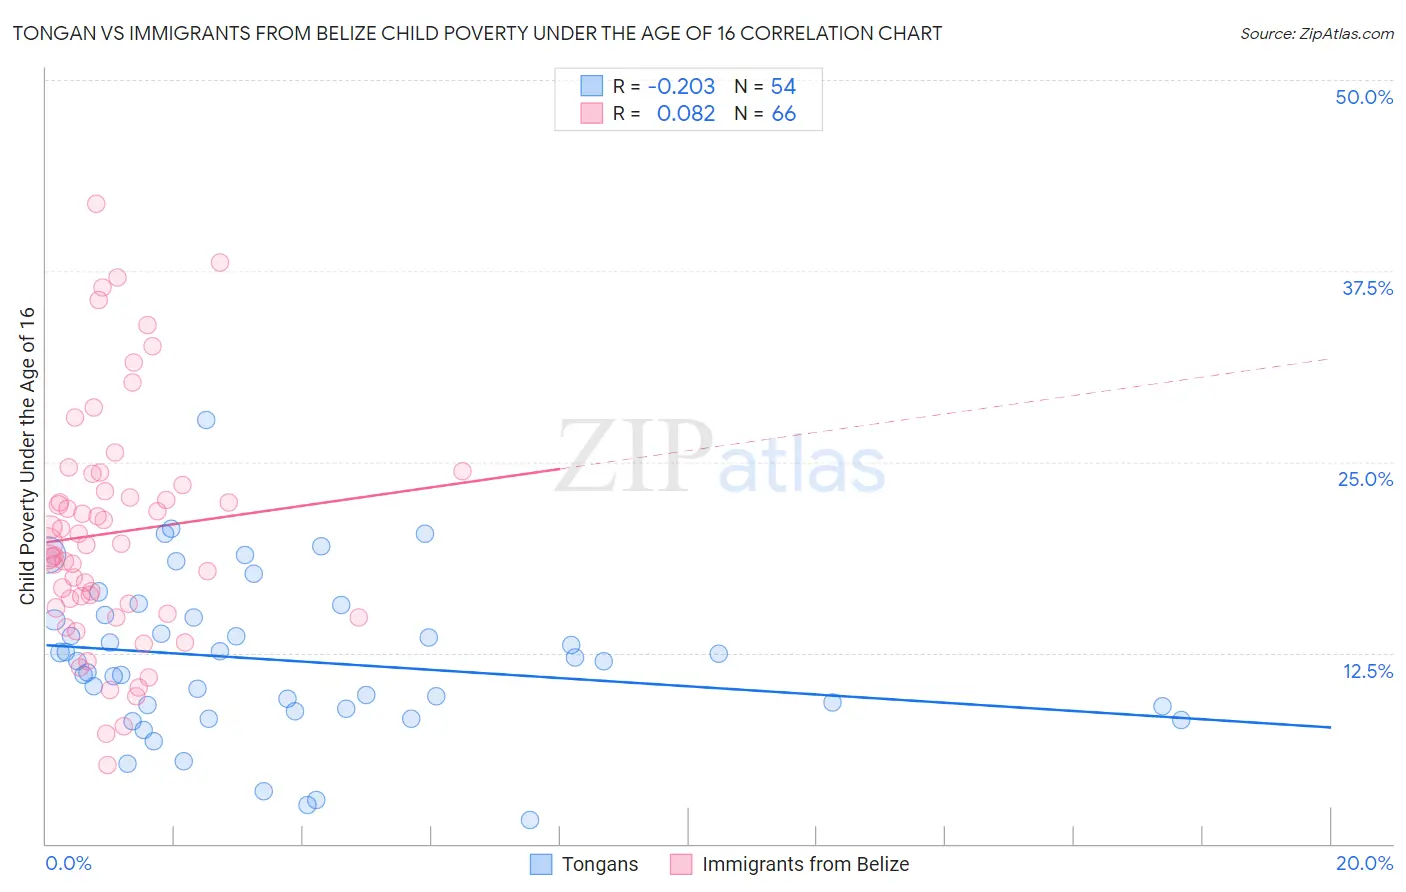 Tongan vs Immigrants from Belize Child Poverty Under the Age of 16